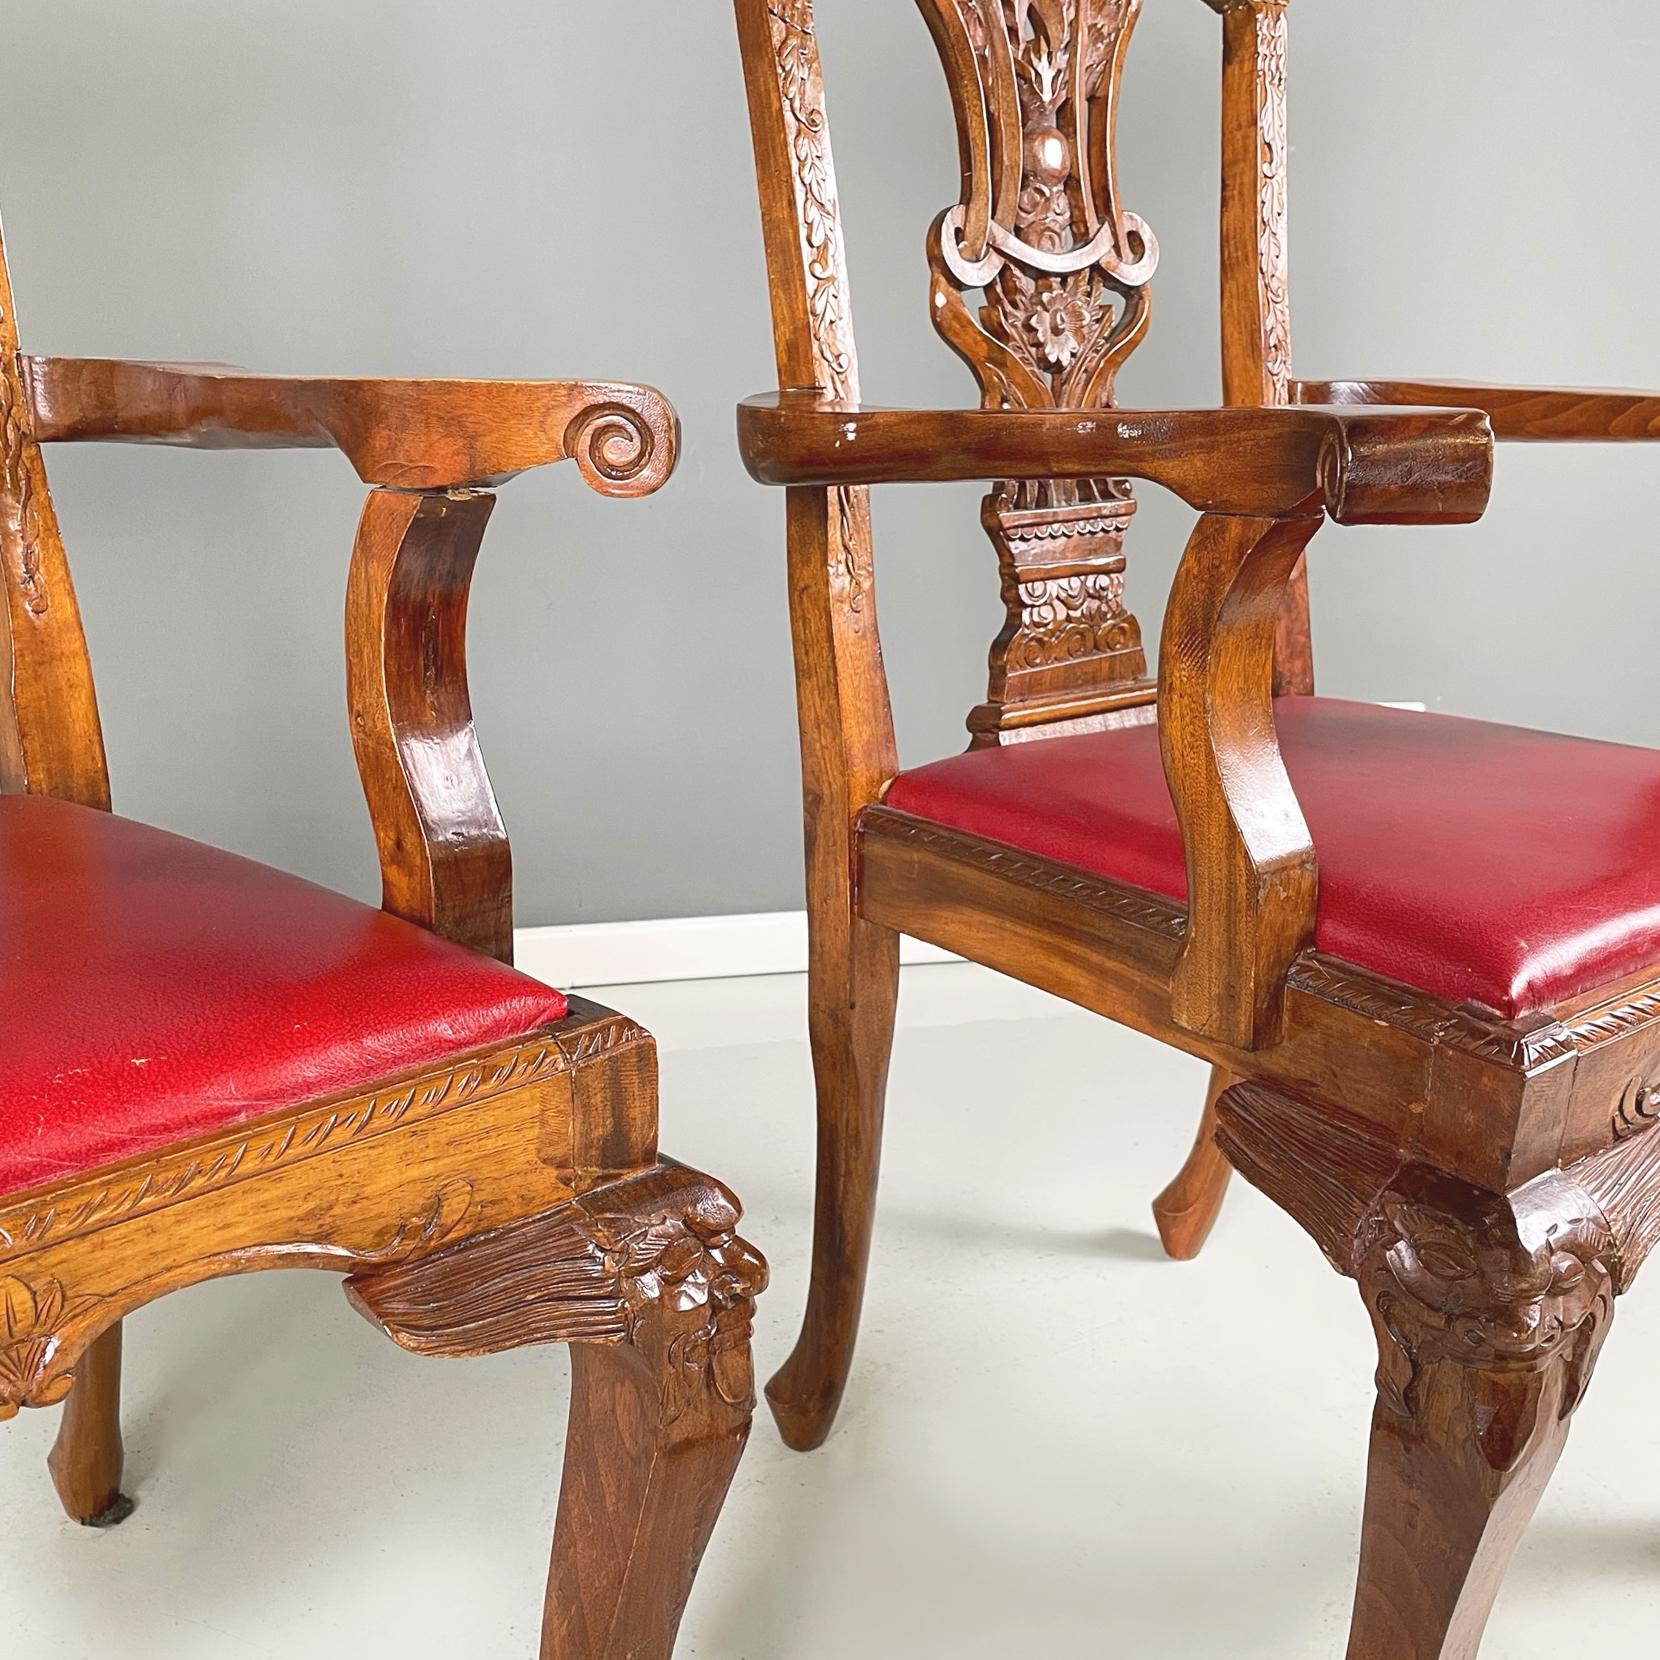 Chippendale Style Wooden Chairs with Red Leather, Early 1900s For Sale 2